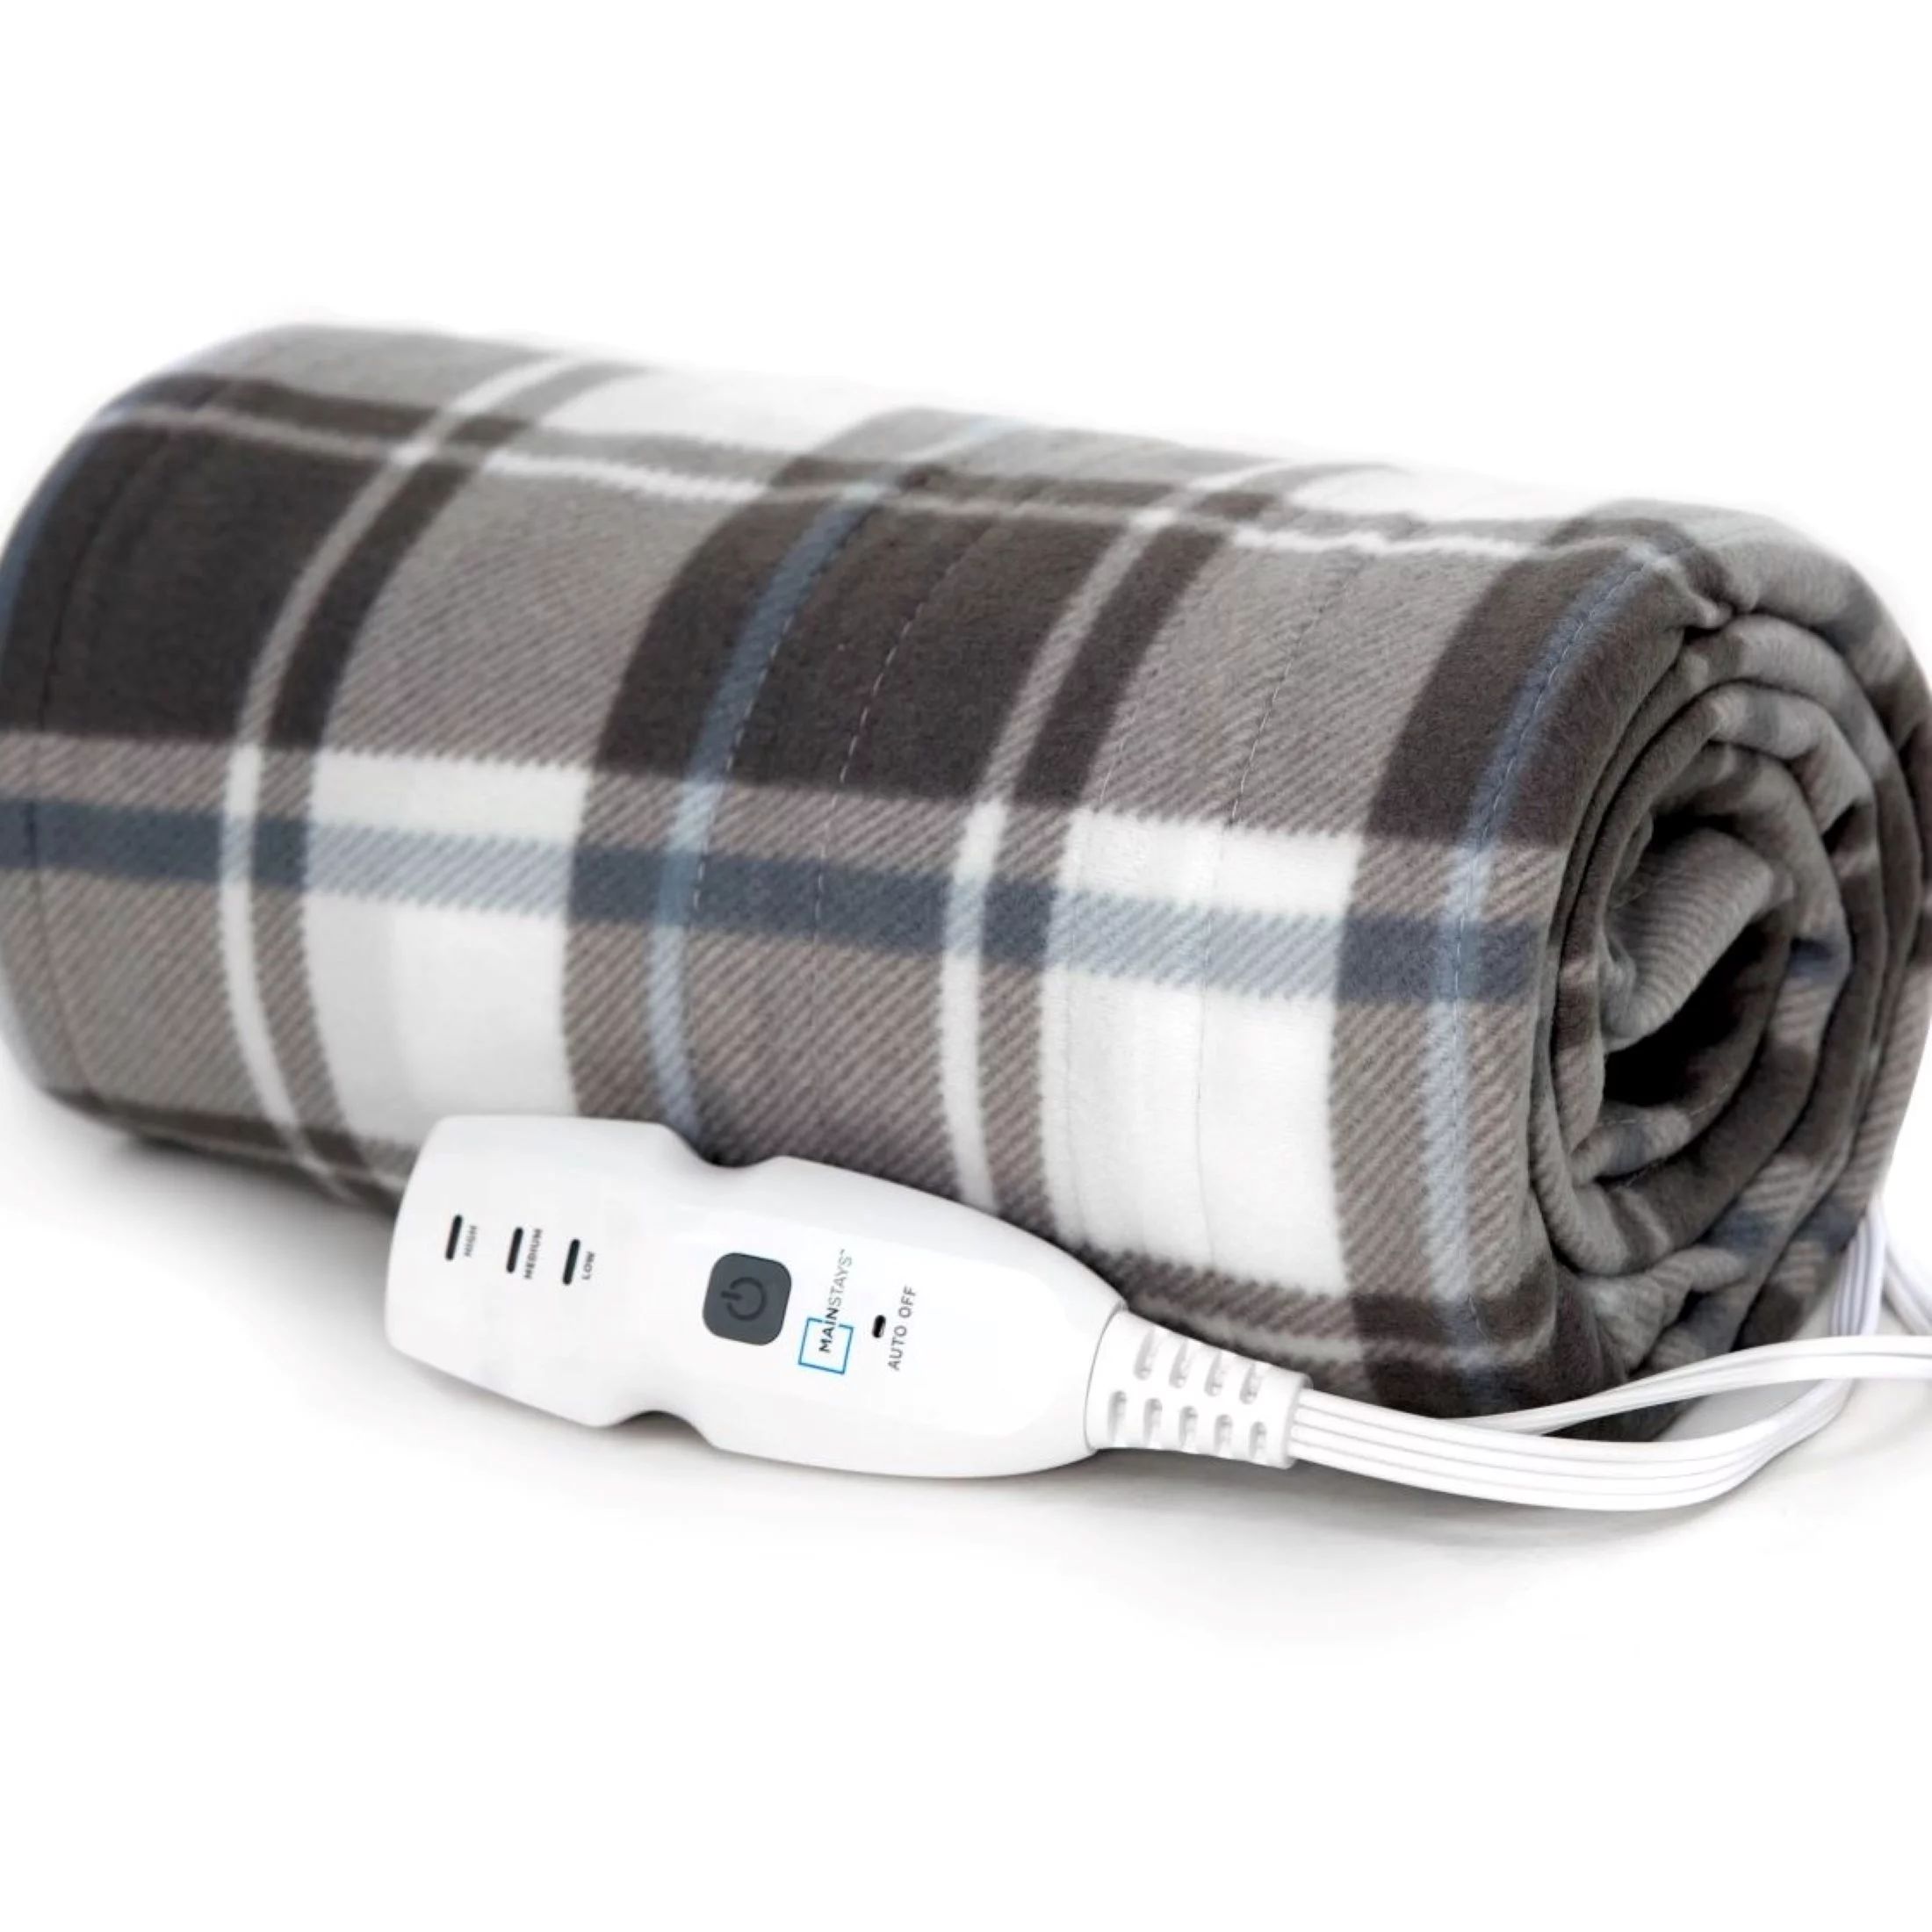 Mainstays Soft Fleece Electric Heated Throw Blanket, Gray and White Plaid, 50"x60", all ages | Walmart (US)